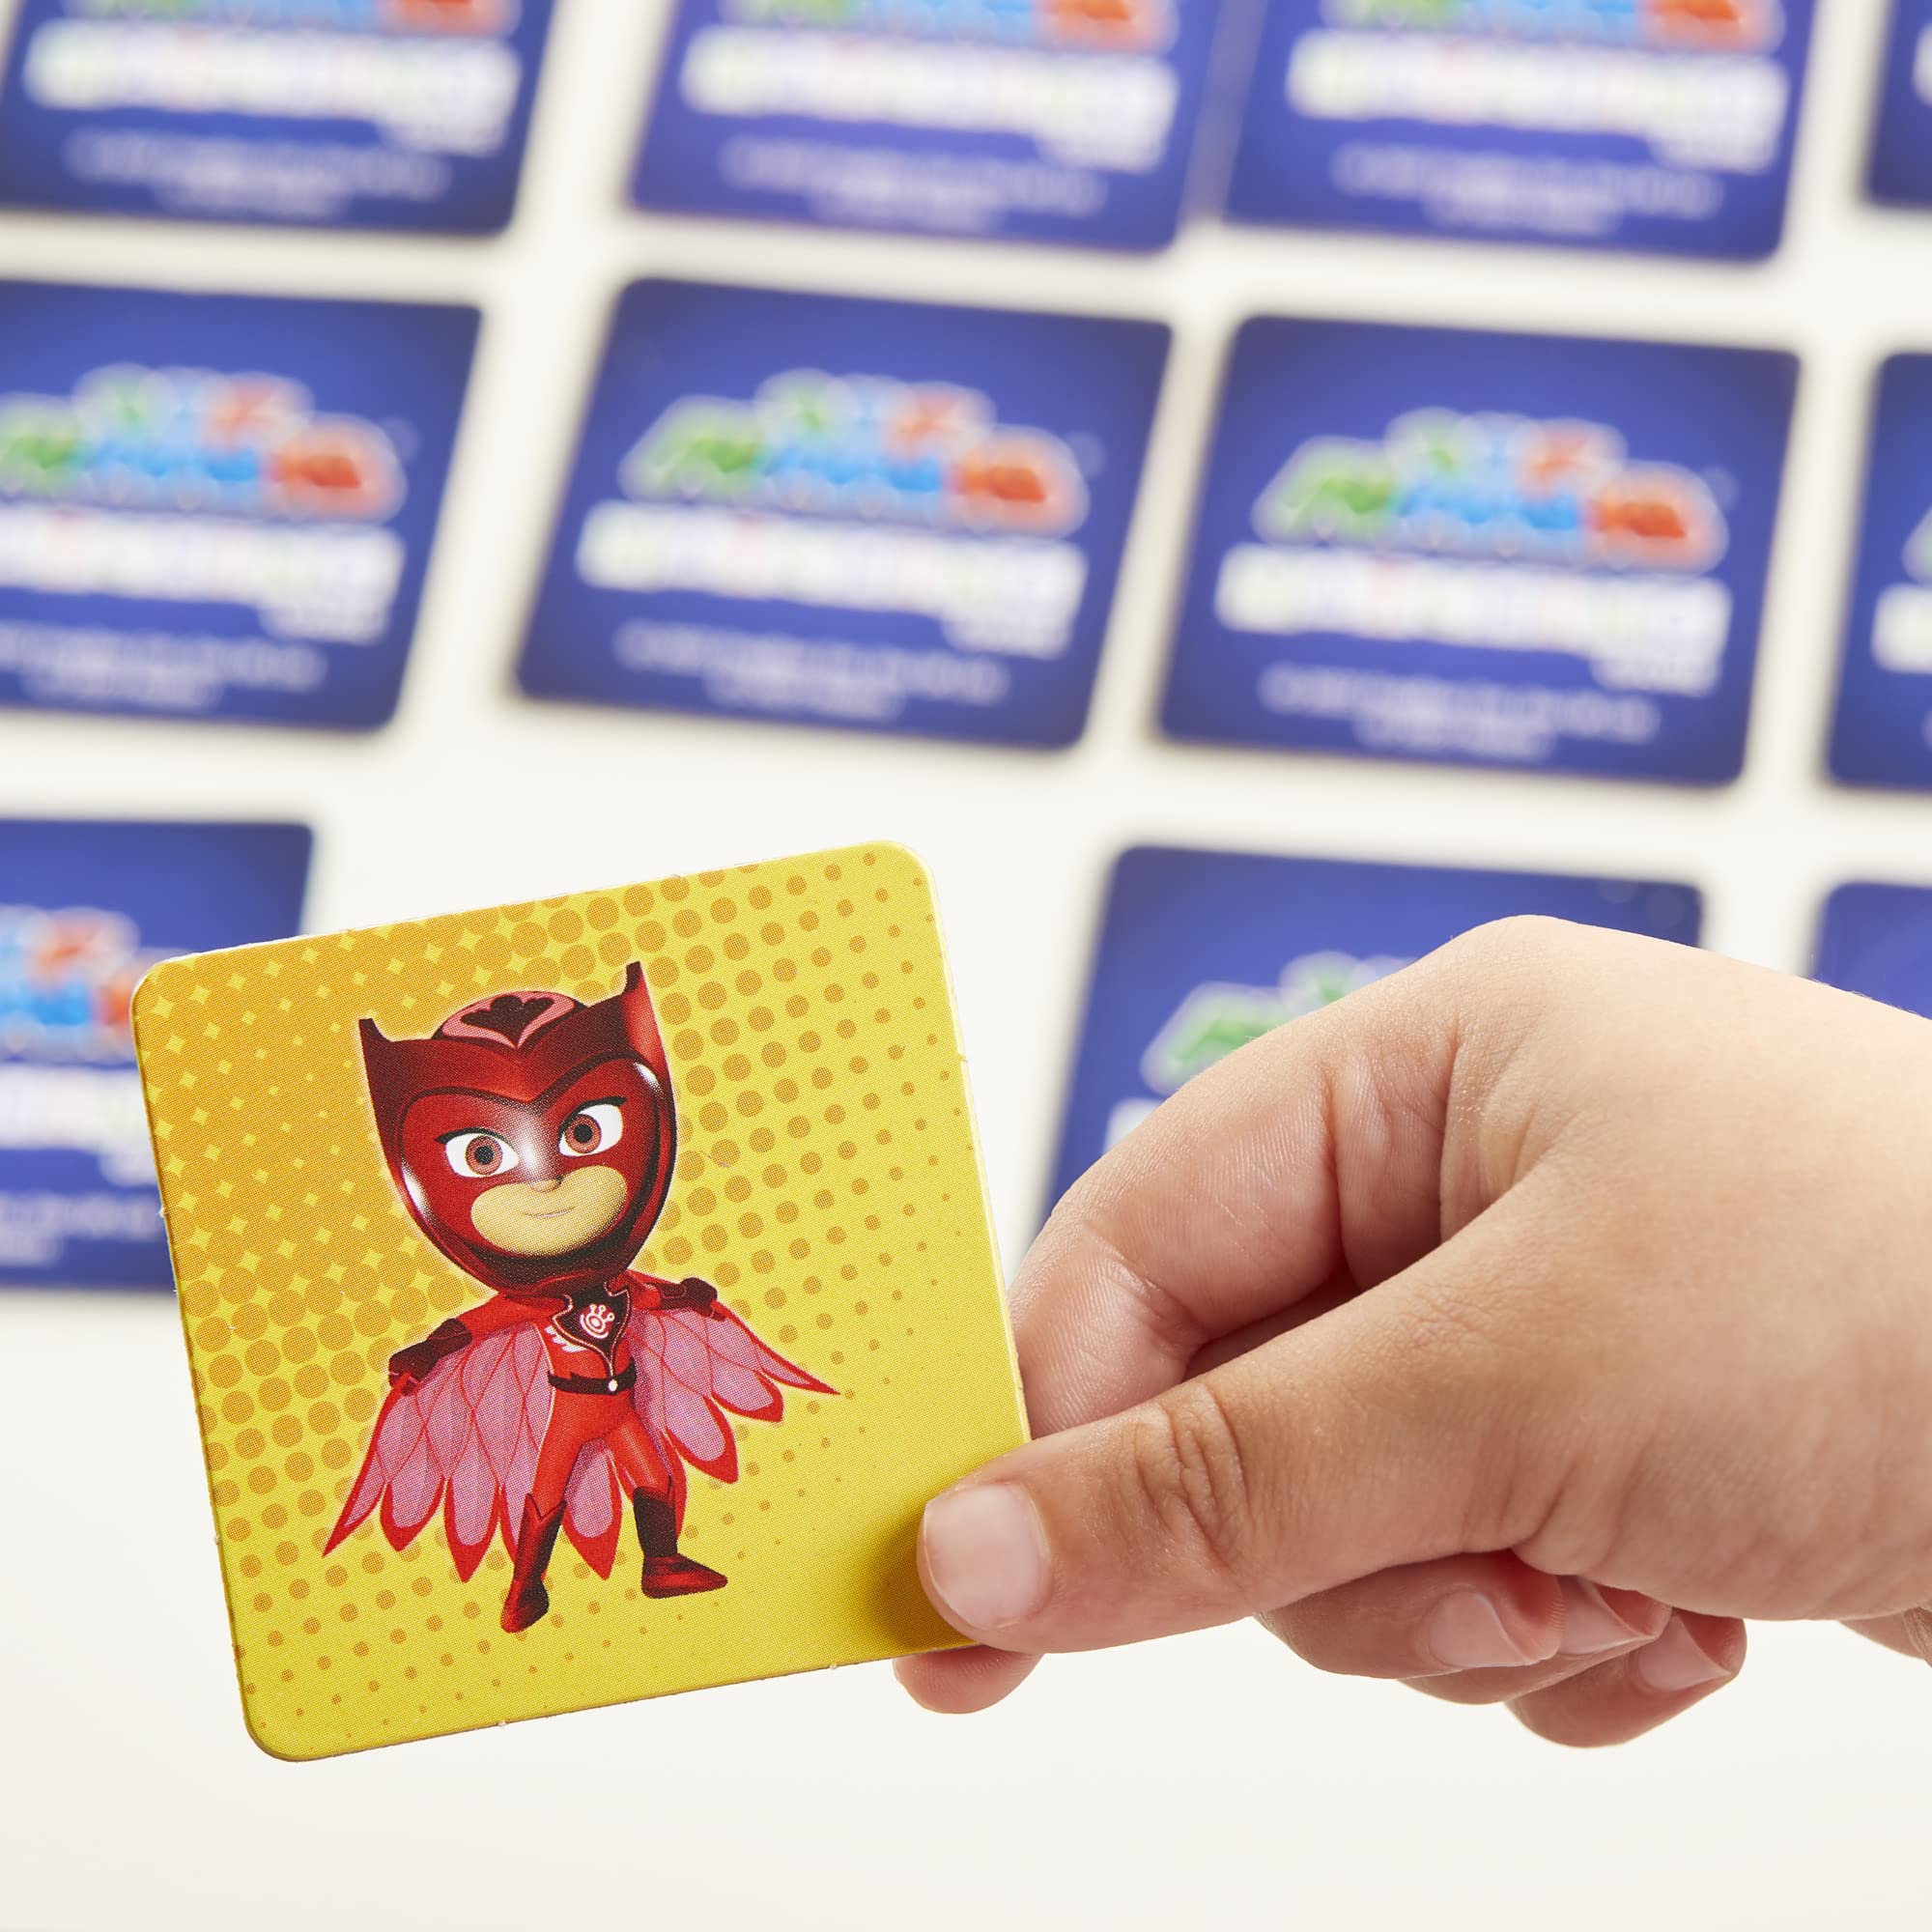 PJ Masks Matching Game for Kids Ages 3 and Up, Fun Preschool Memory Game for 1+ Players